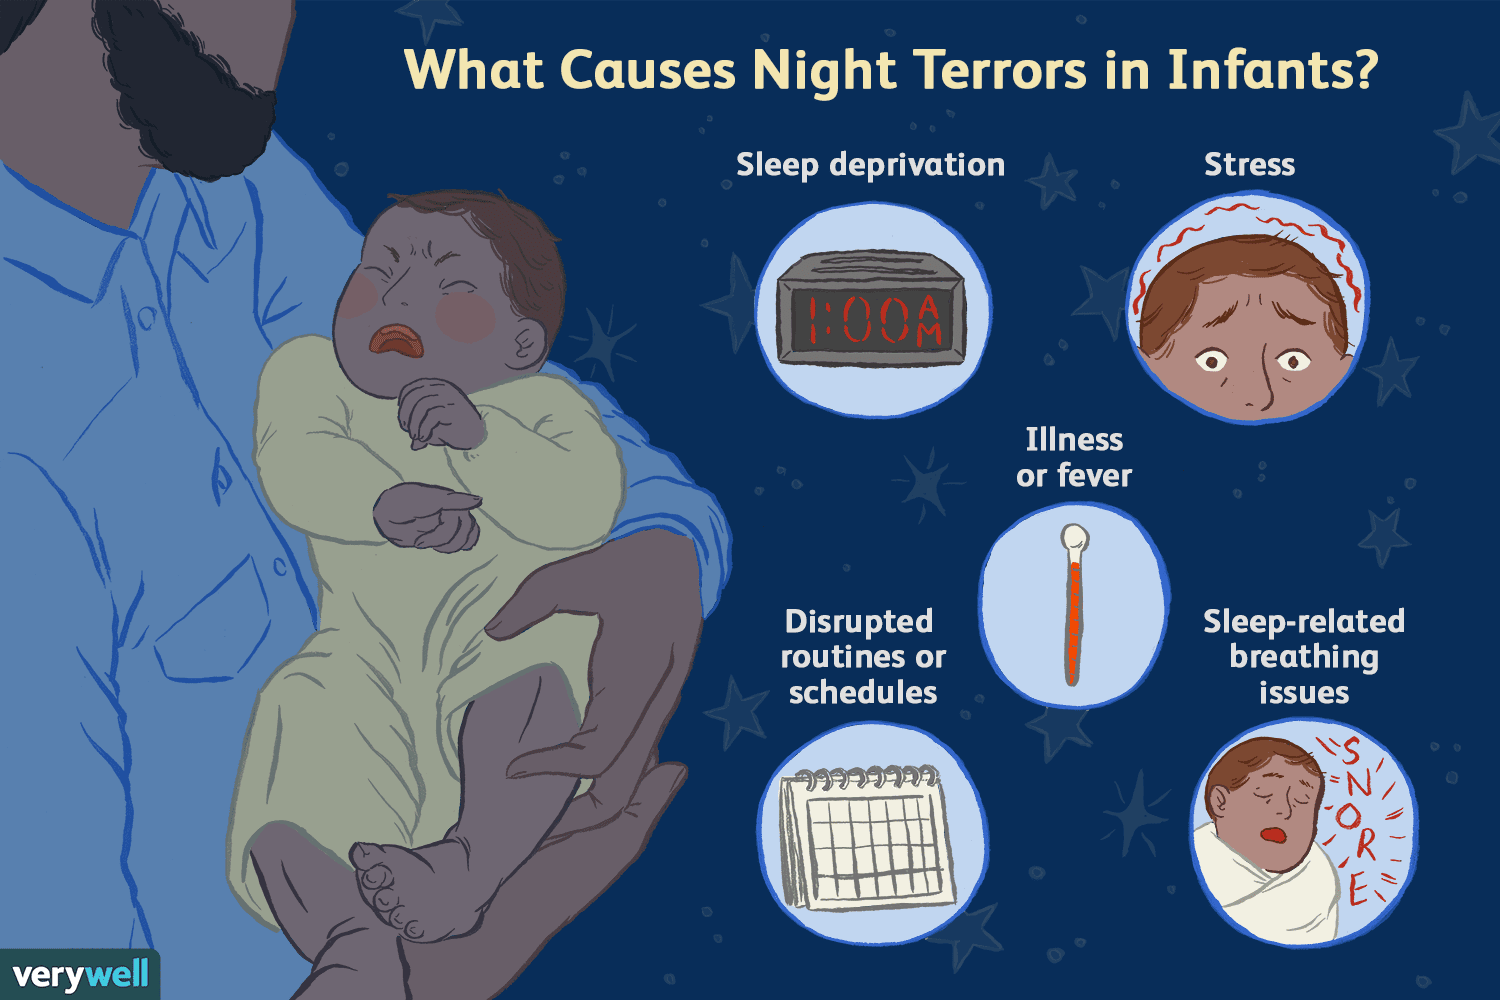 What are the common triggers for night terrors in children?